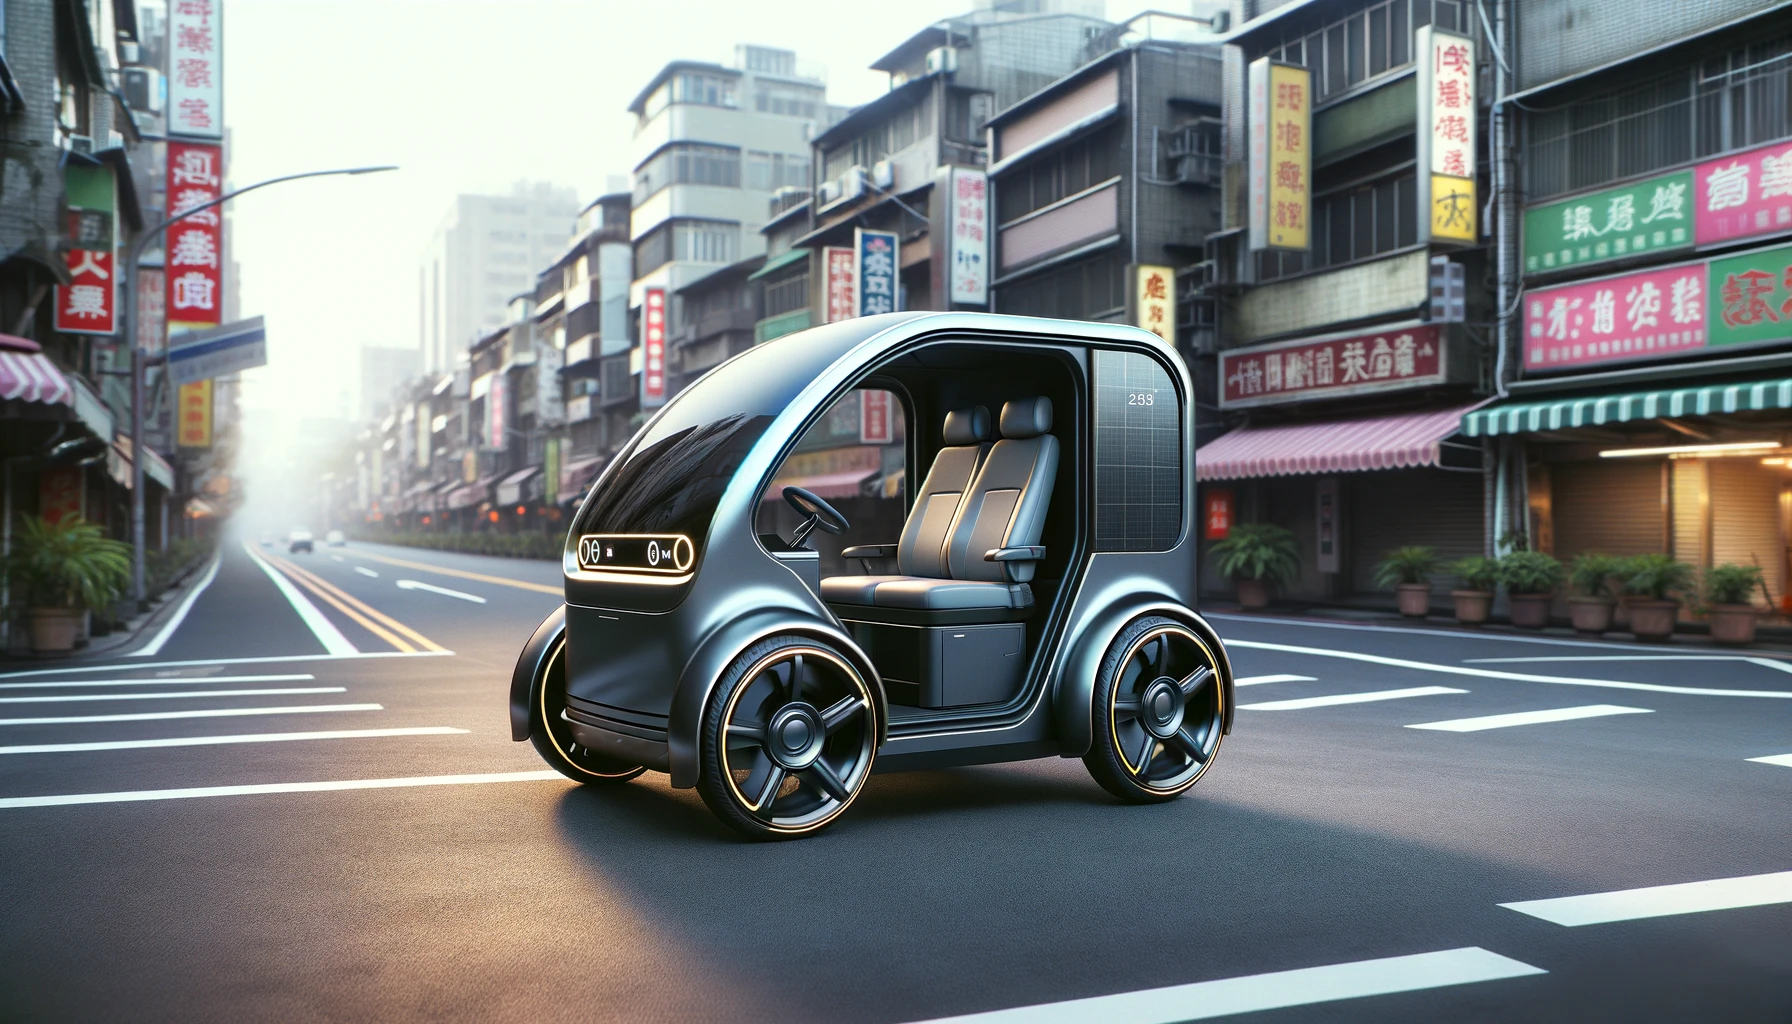 Taiwan Self-Driving Gharry: Easy Booking, Safety